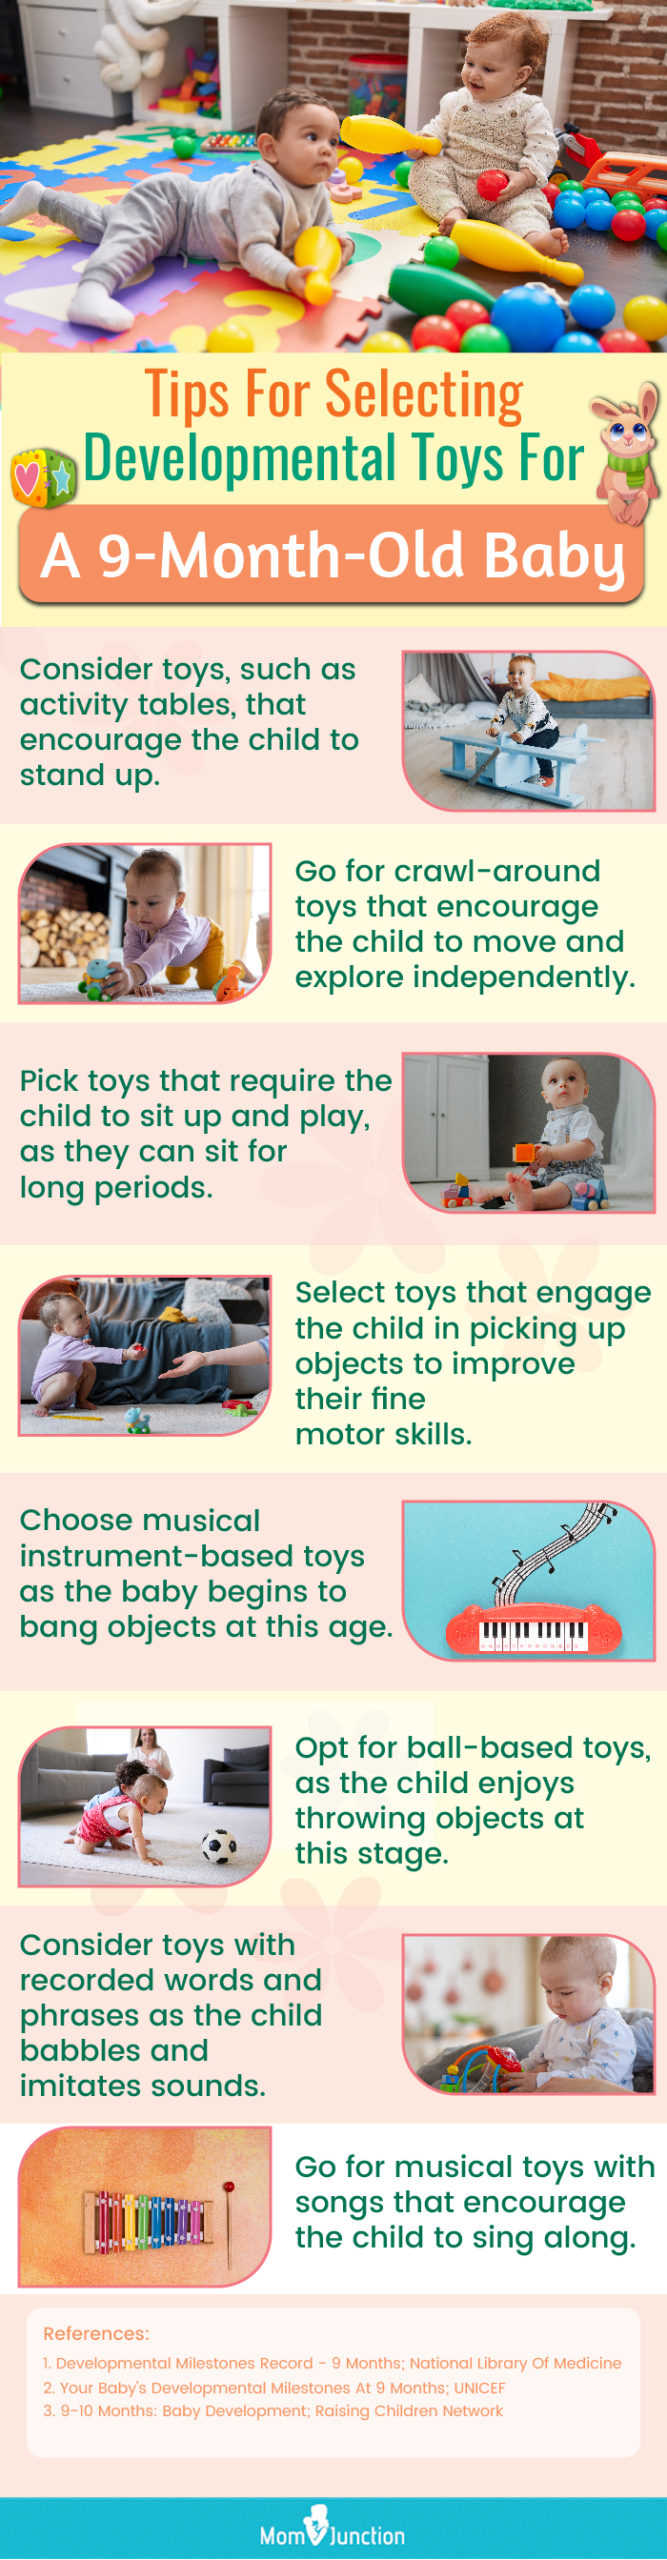 Tips For Selecting Developmental Toys For A 9-Month-Old Baby (infographic)